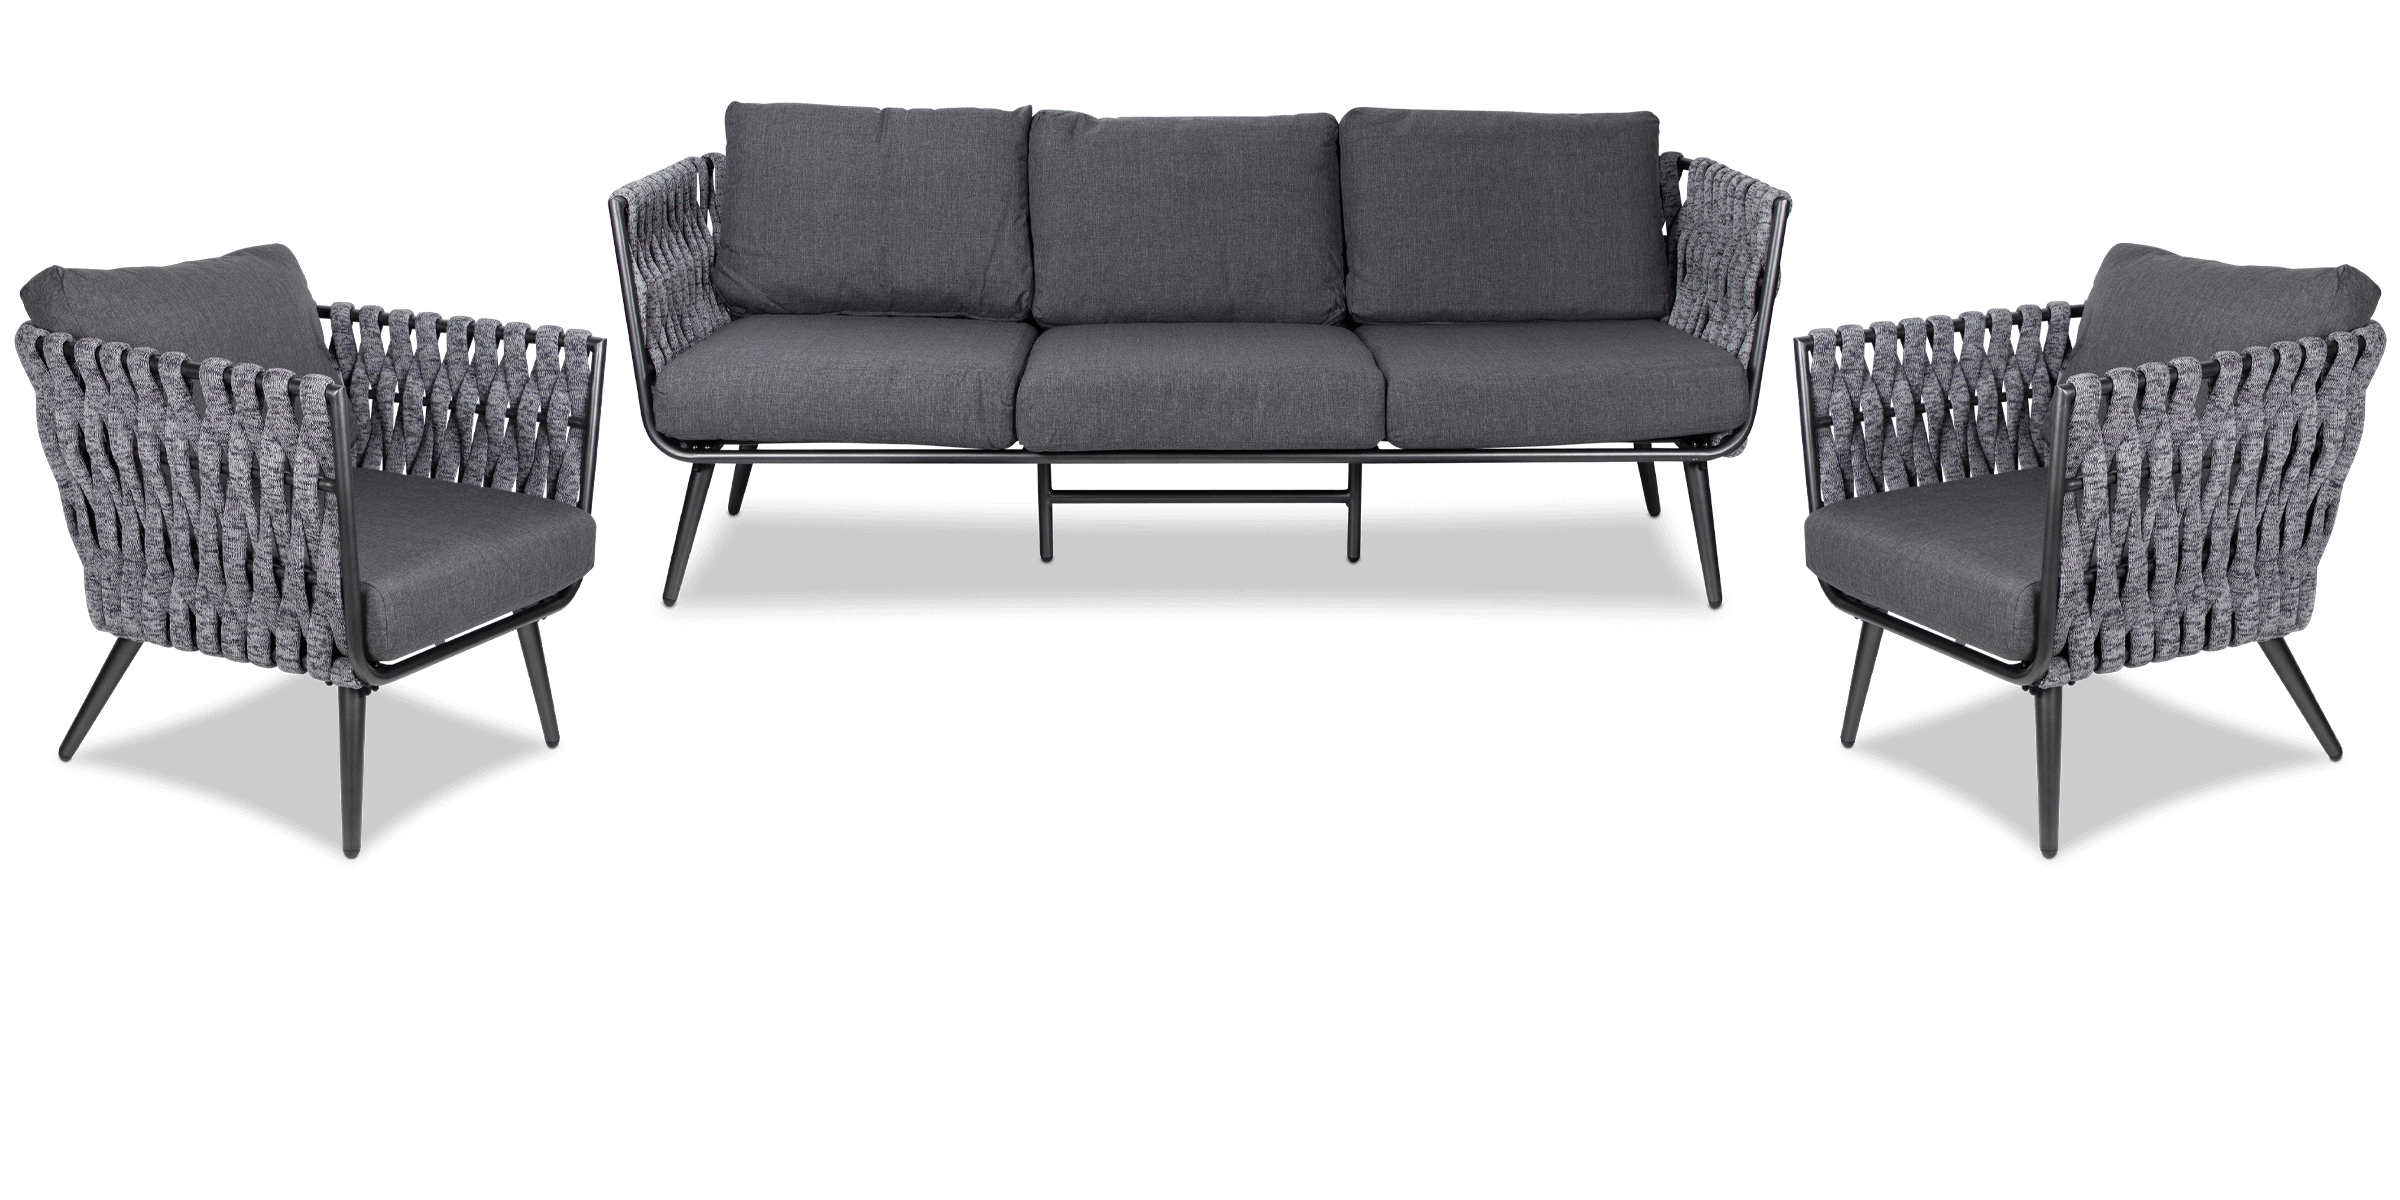 Montego 3 Seater, 2 x Armchair in Gunmetal Grey with Charcoal Spun Poly Cushions and Midnight Fleck Olefin Rope